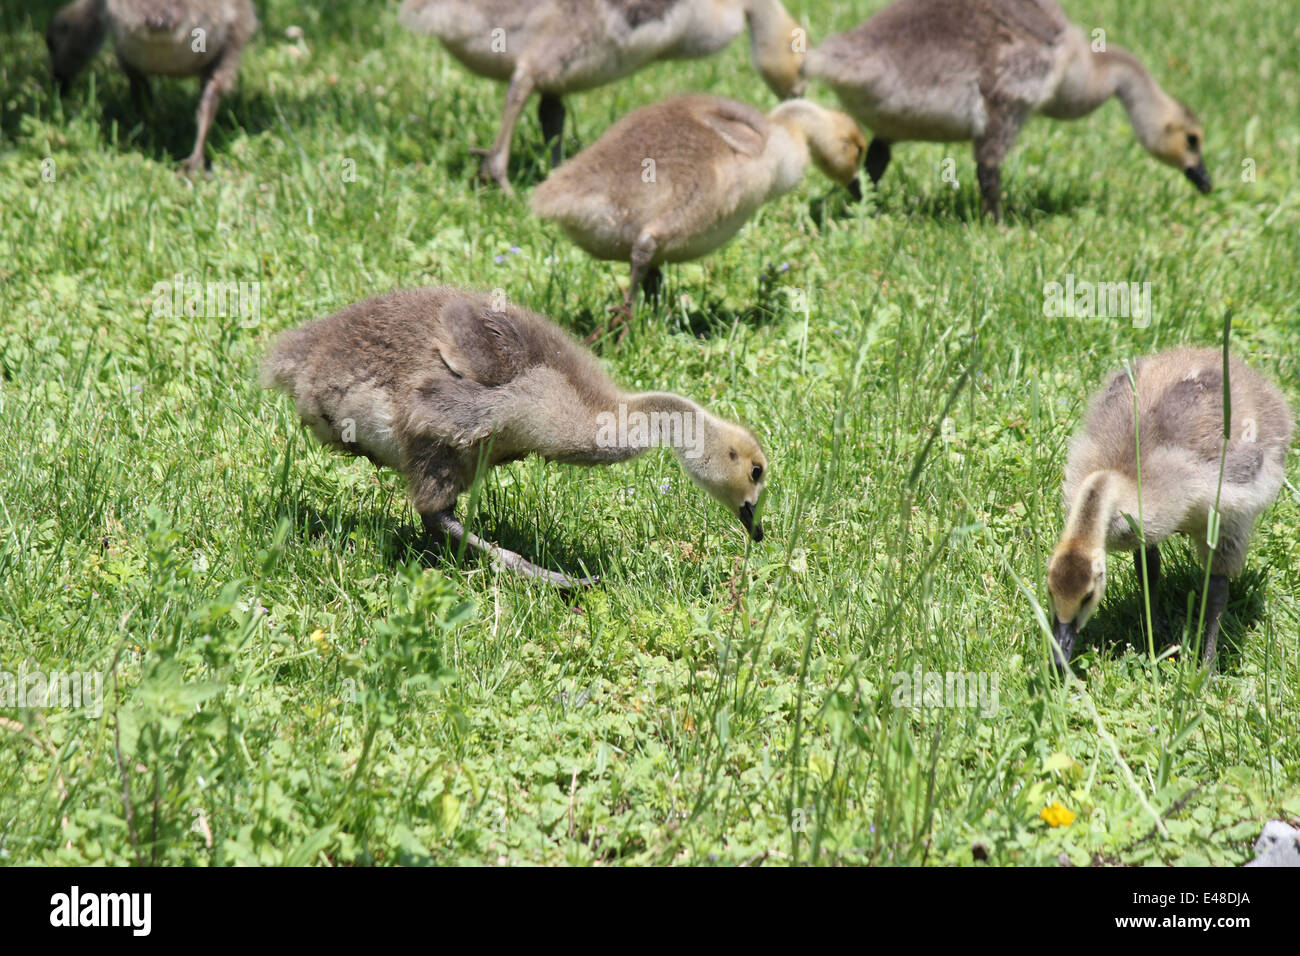 Fuzzy little gosling's (Canada Geese) about 1 month old in the grass foraging for food, Stock Photo